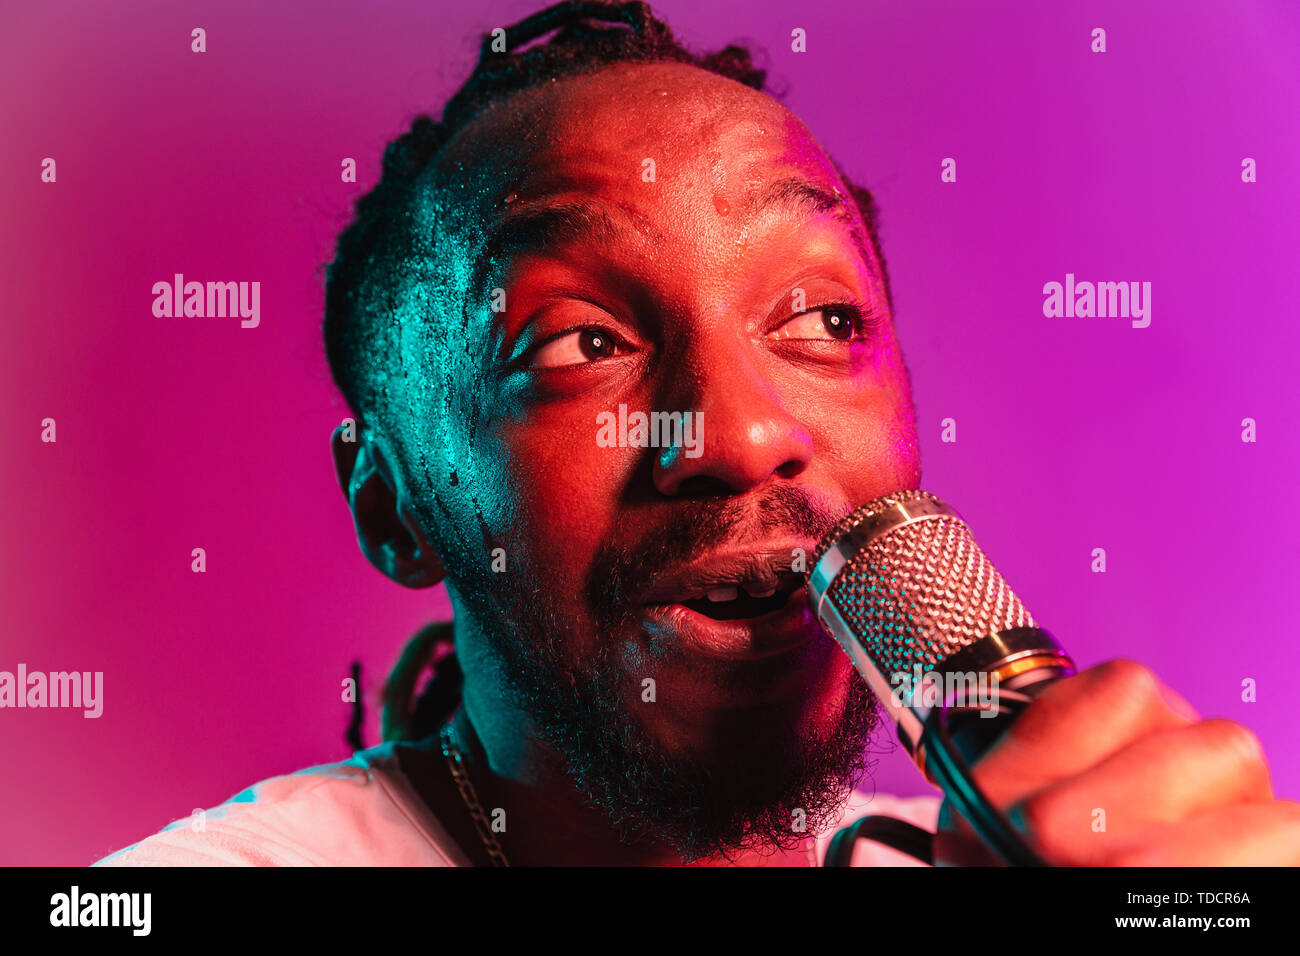 Young african-american jazz musician with microphone singing a song on purple studio background in trendy neon light. Concept of music, hobby, inspirness. Colorful portrait of joyful attractive artist. Stock Photo